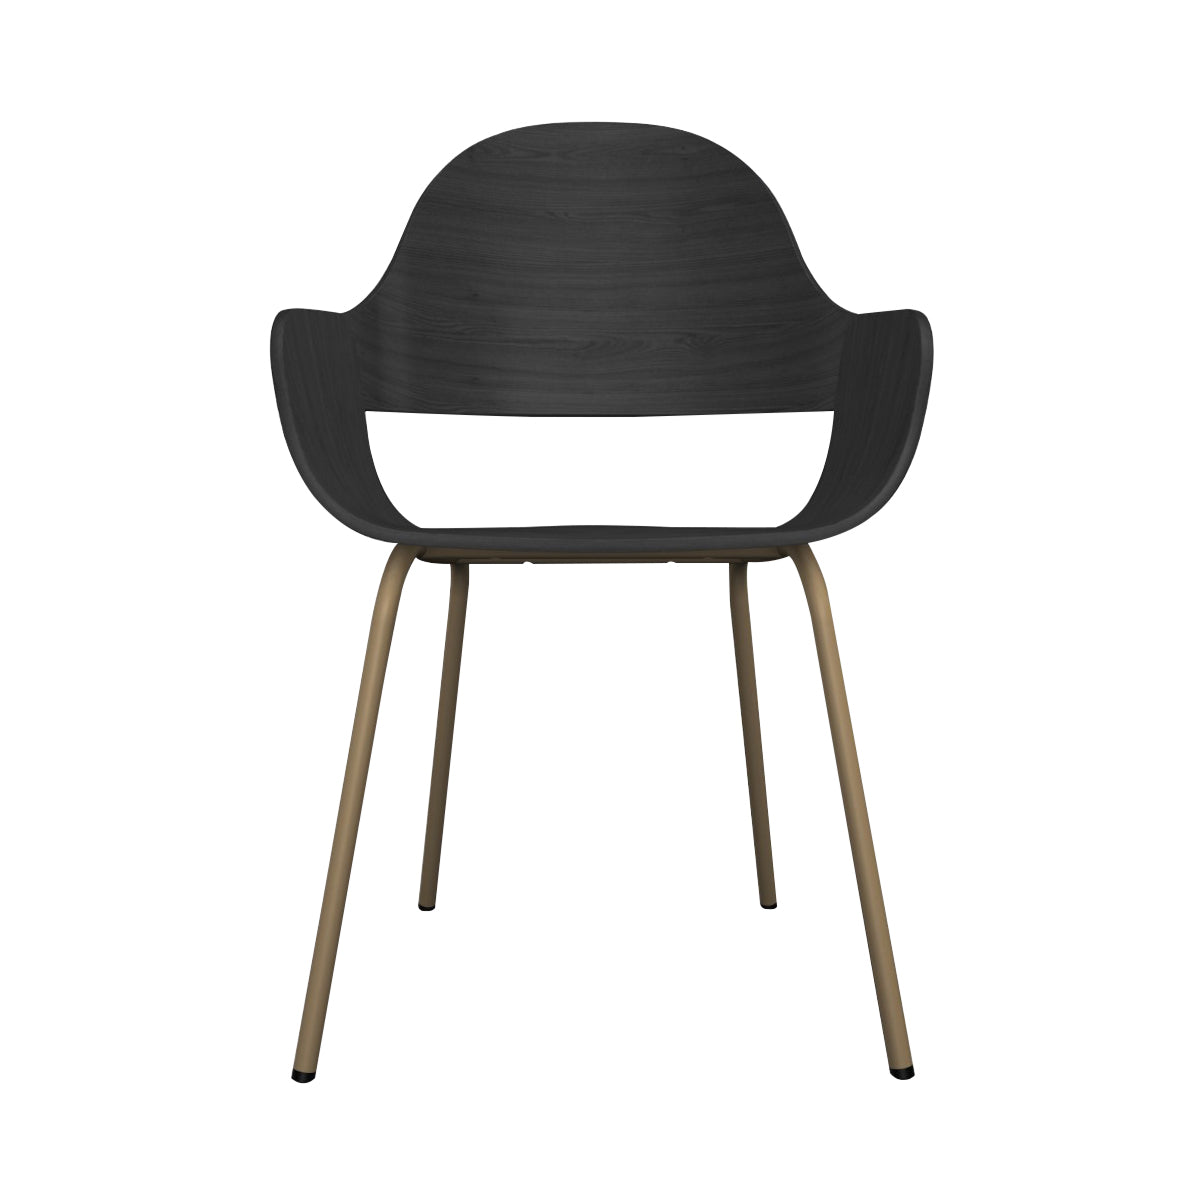 Showtime Nude Chair with Metal Base: Ash Stained Black + Beige